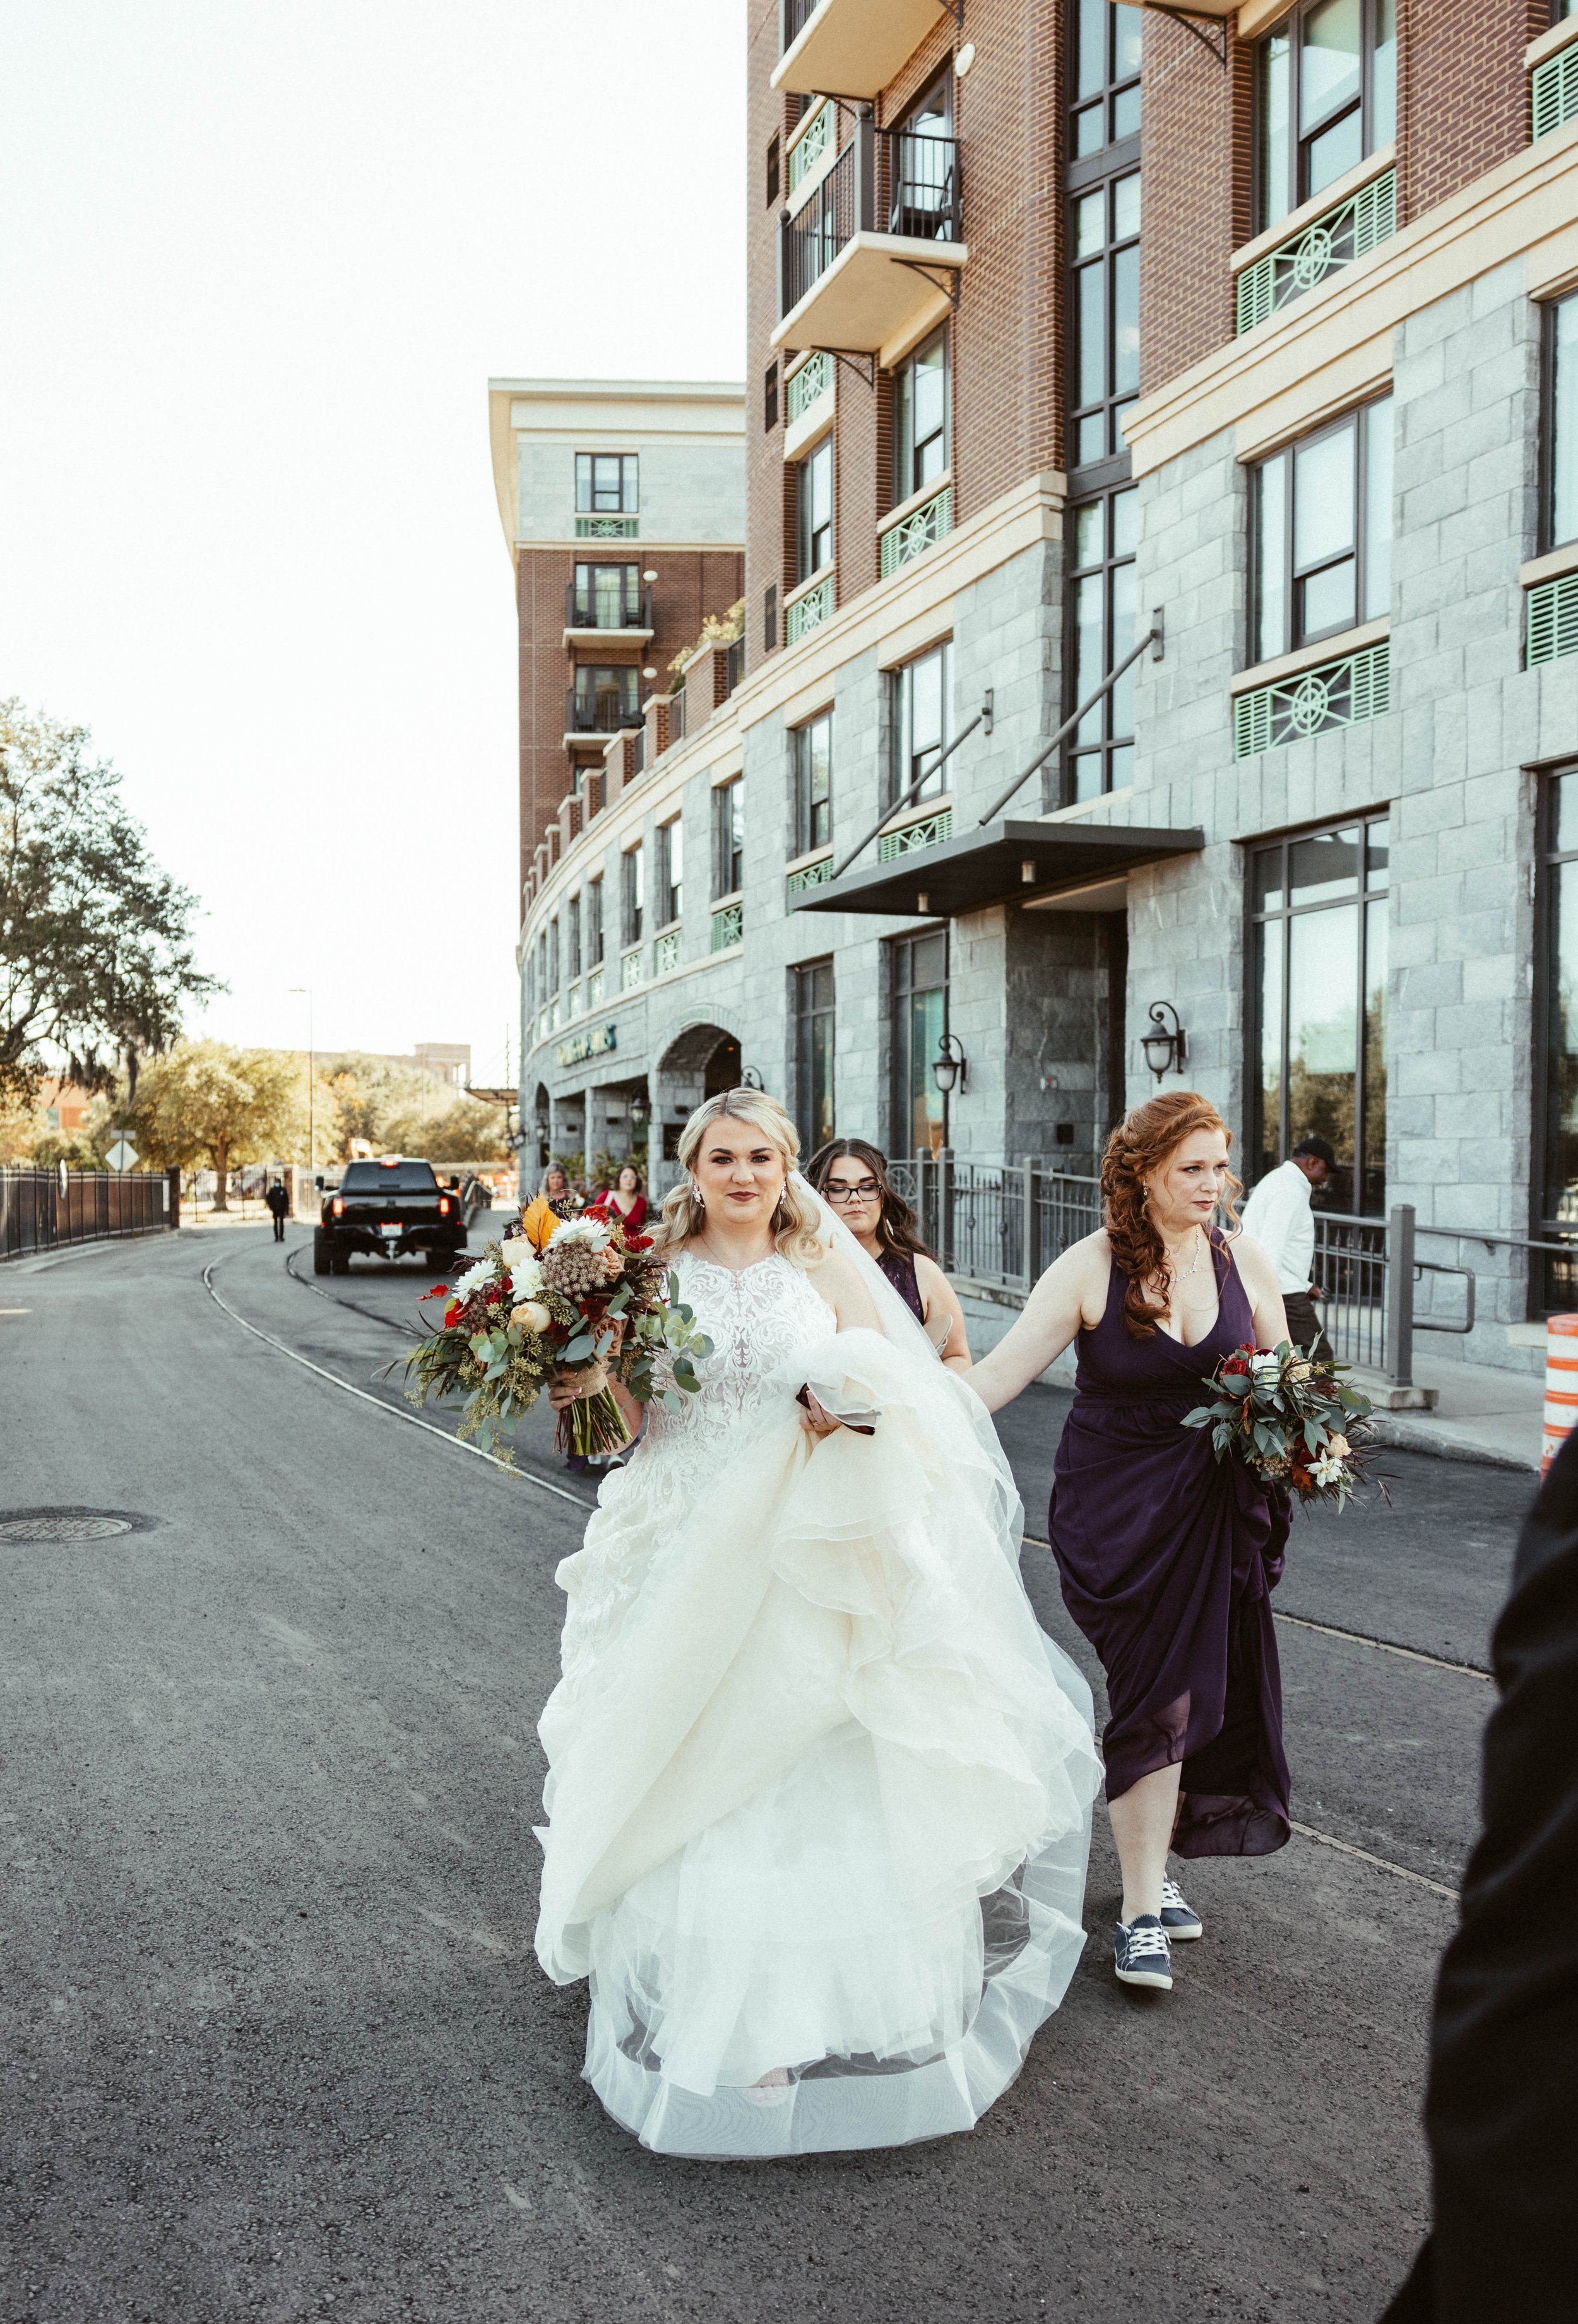 Ivory-and-beau-bride-ansley-bought-sparkly-and-traditional-highneck-ballgown-at-savannah-bridal-shop-gets-married-at-cathedral-with-the-help-of-ivory-and-beau-who-created-floral-peices-for-the-ceremony-and-reception-in-their-savannah-florwer-shop-22.jpg